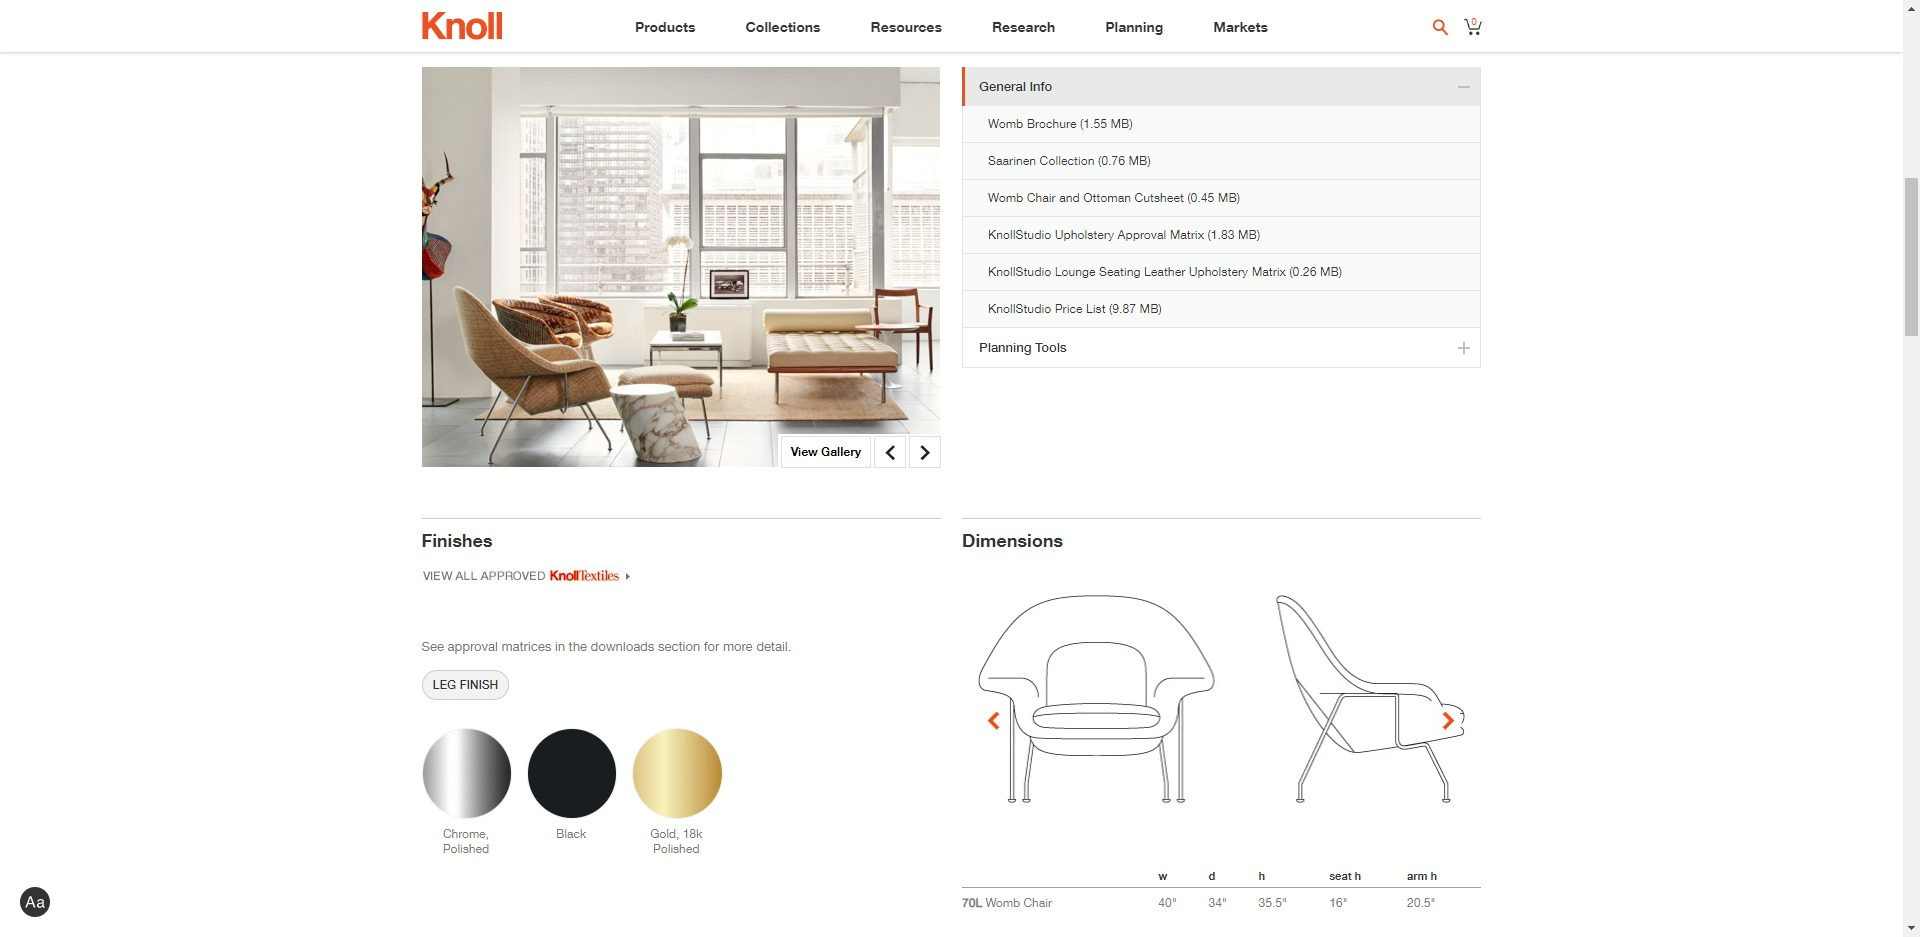 Knoll product info